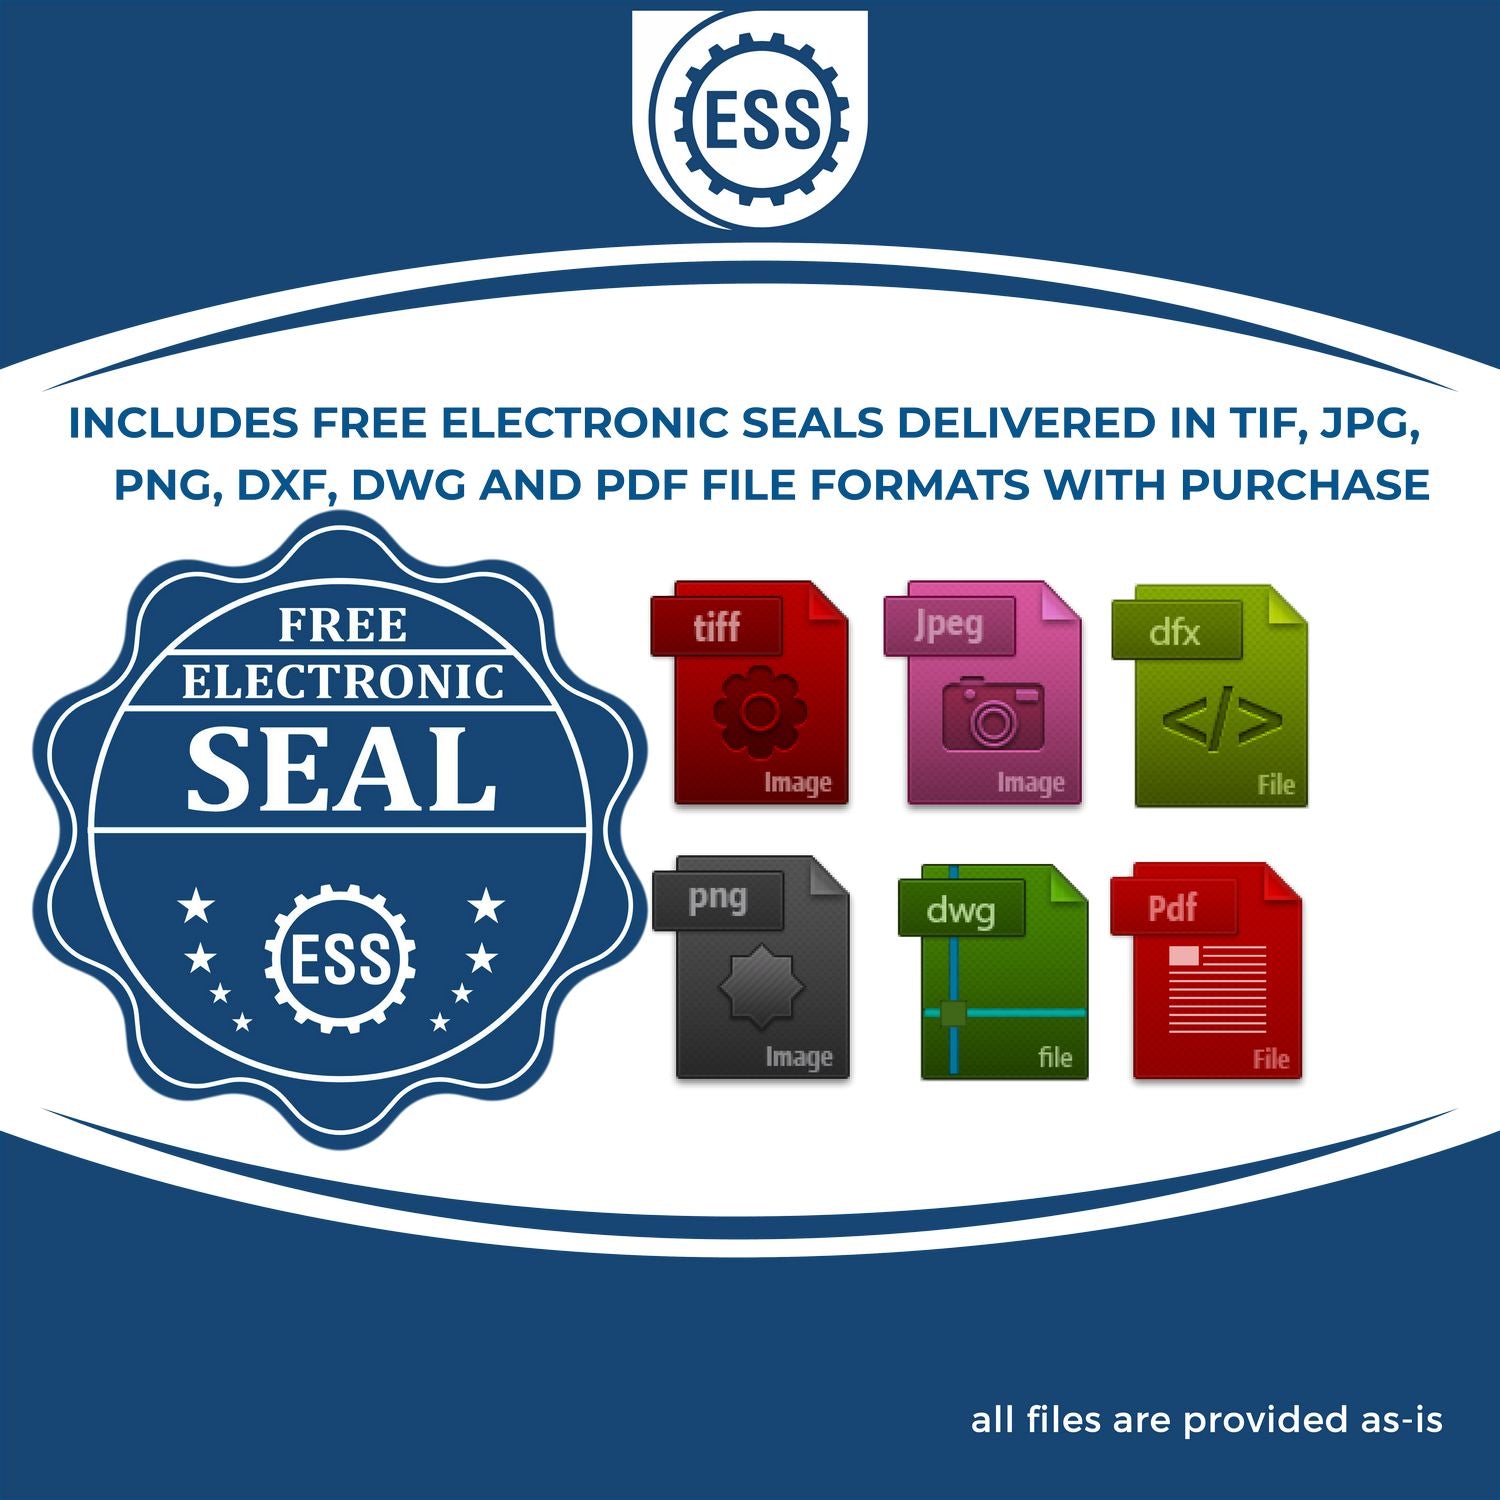 An infographic for the free electronic seal for the Handheld Virginia Land Surveyor Seal illustrating the different file type icons such as DXF, DWG, TIF, JPG and PNG.